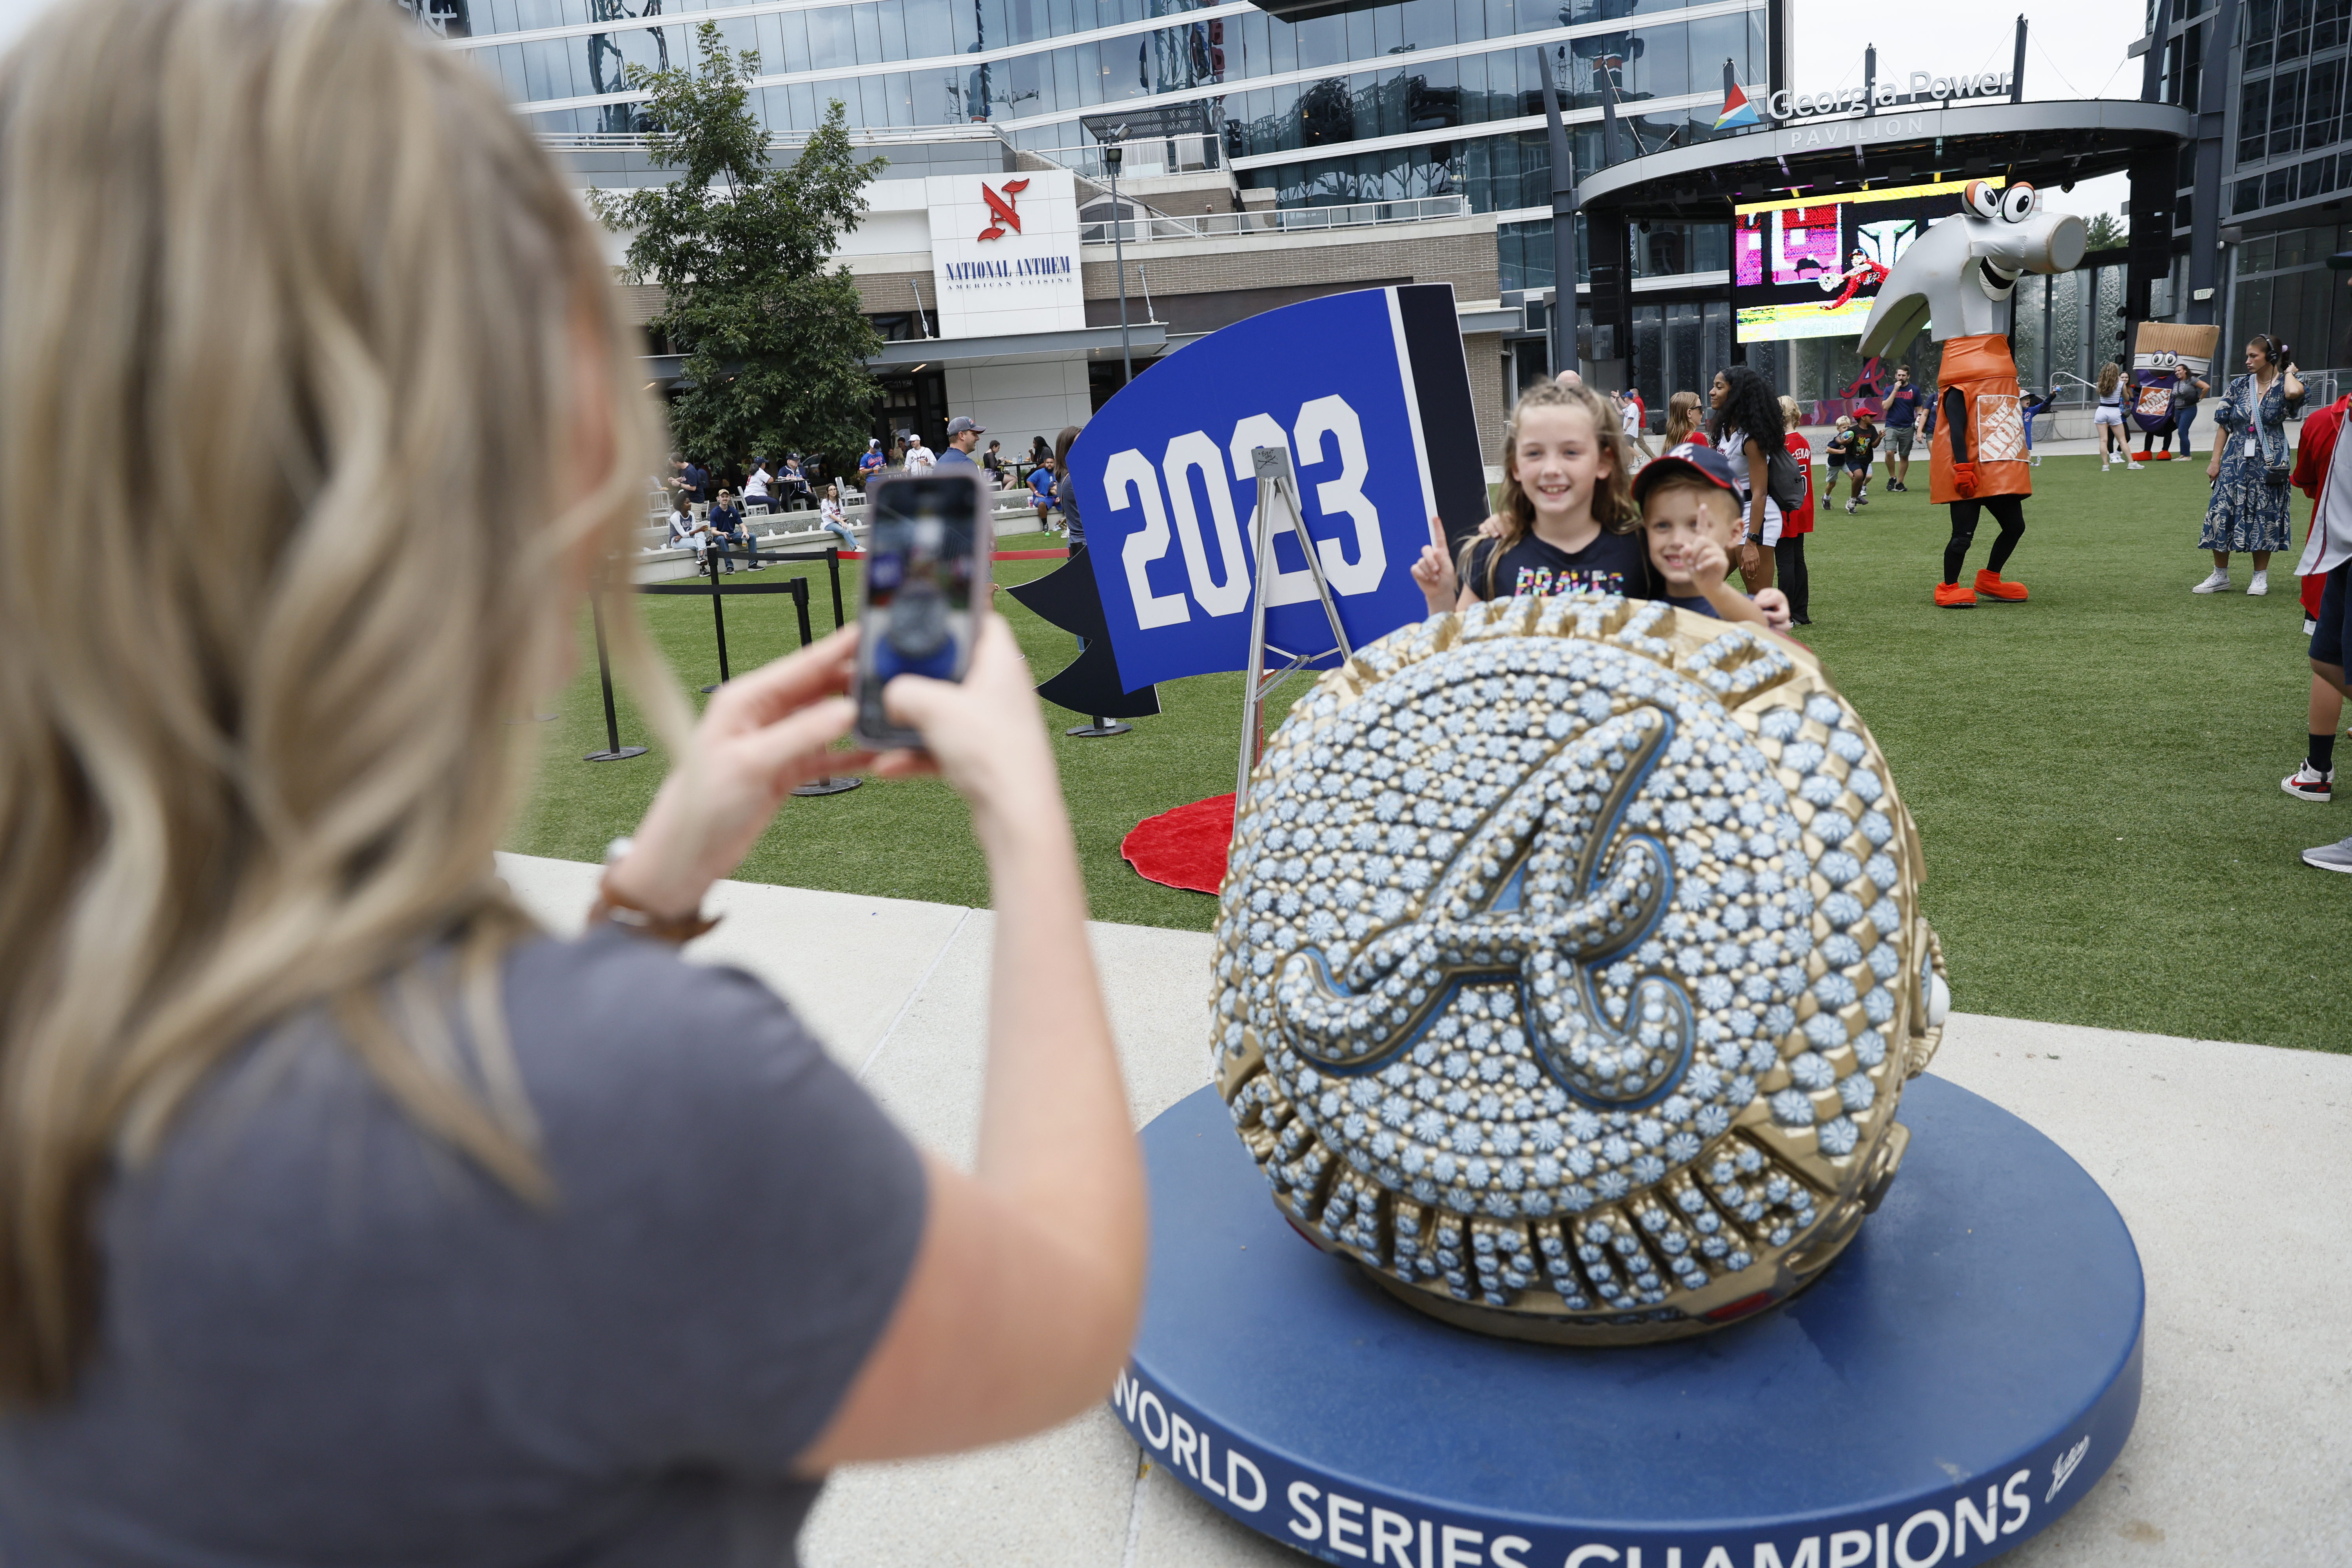 Atlanta Braves gear up for postseason fun: Live bands, DJ's, and a